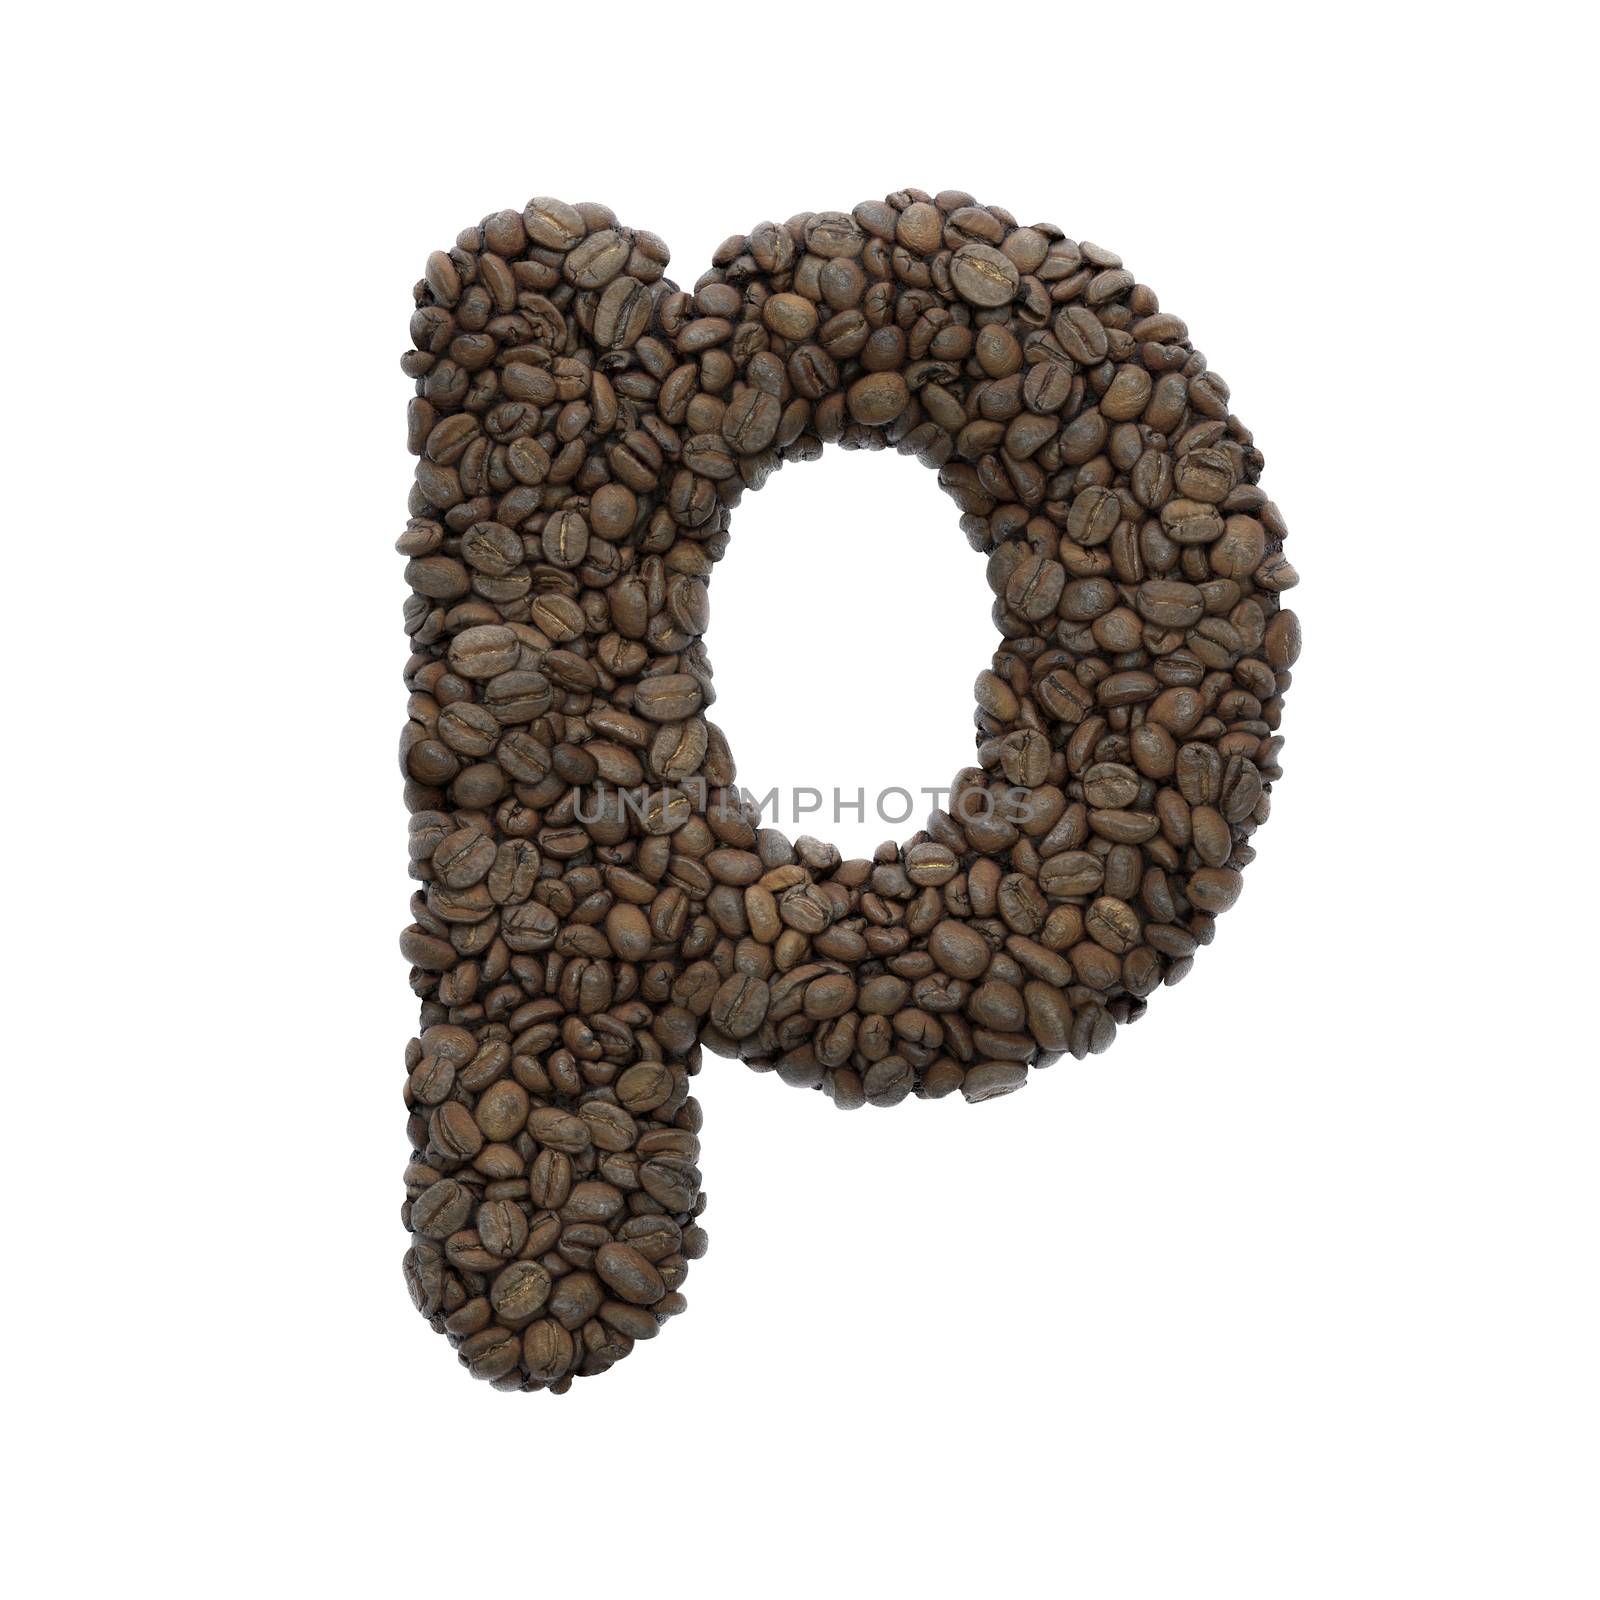 Coffee letter P - Small 3d roasted beans font isolated on white background. This alphabet is perfect for creative illustrations related but not limited to Coffee, energy, insomnia...